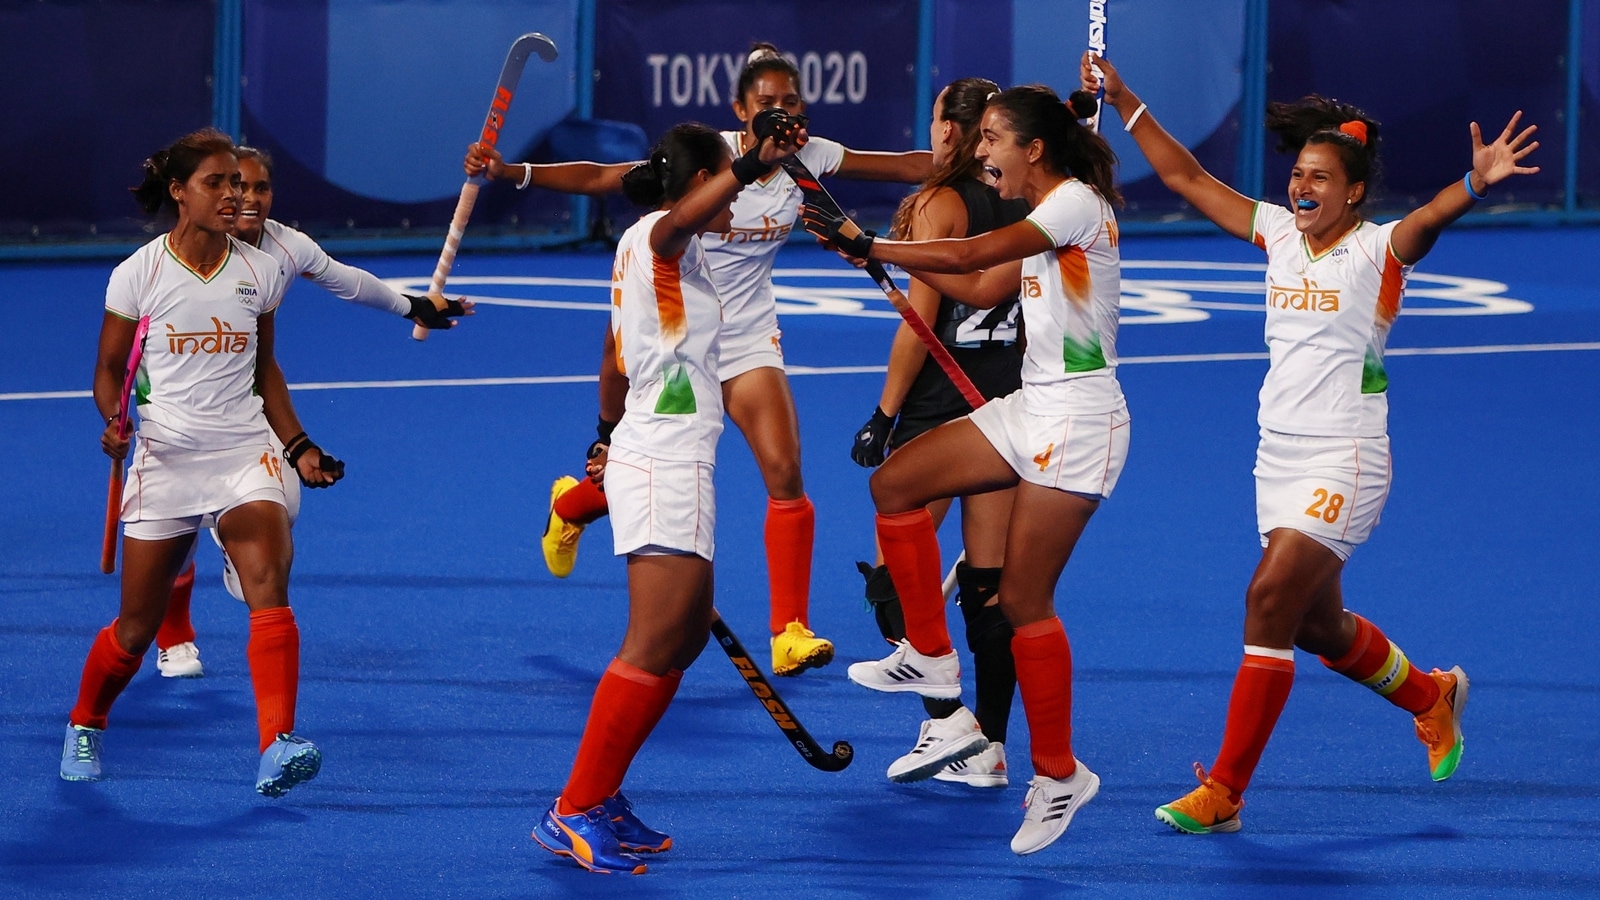 India vs Great Britain womens hockey Live Streaming, Tokyo 2020 When and where to watch IND vs GBR bronze medal match? Olympics